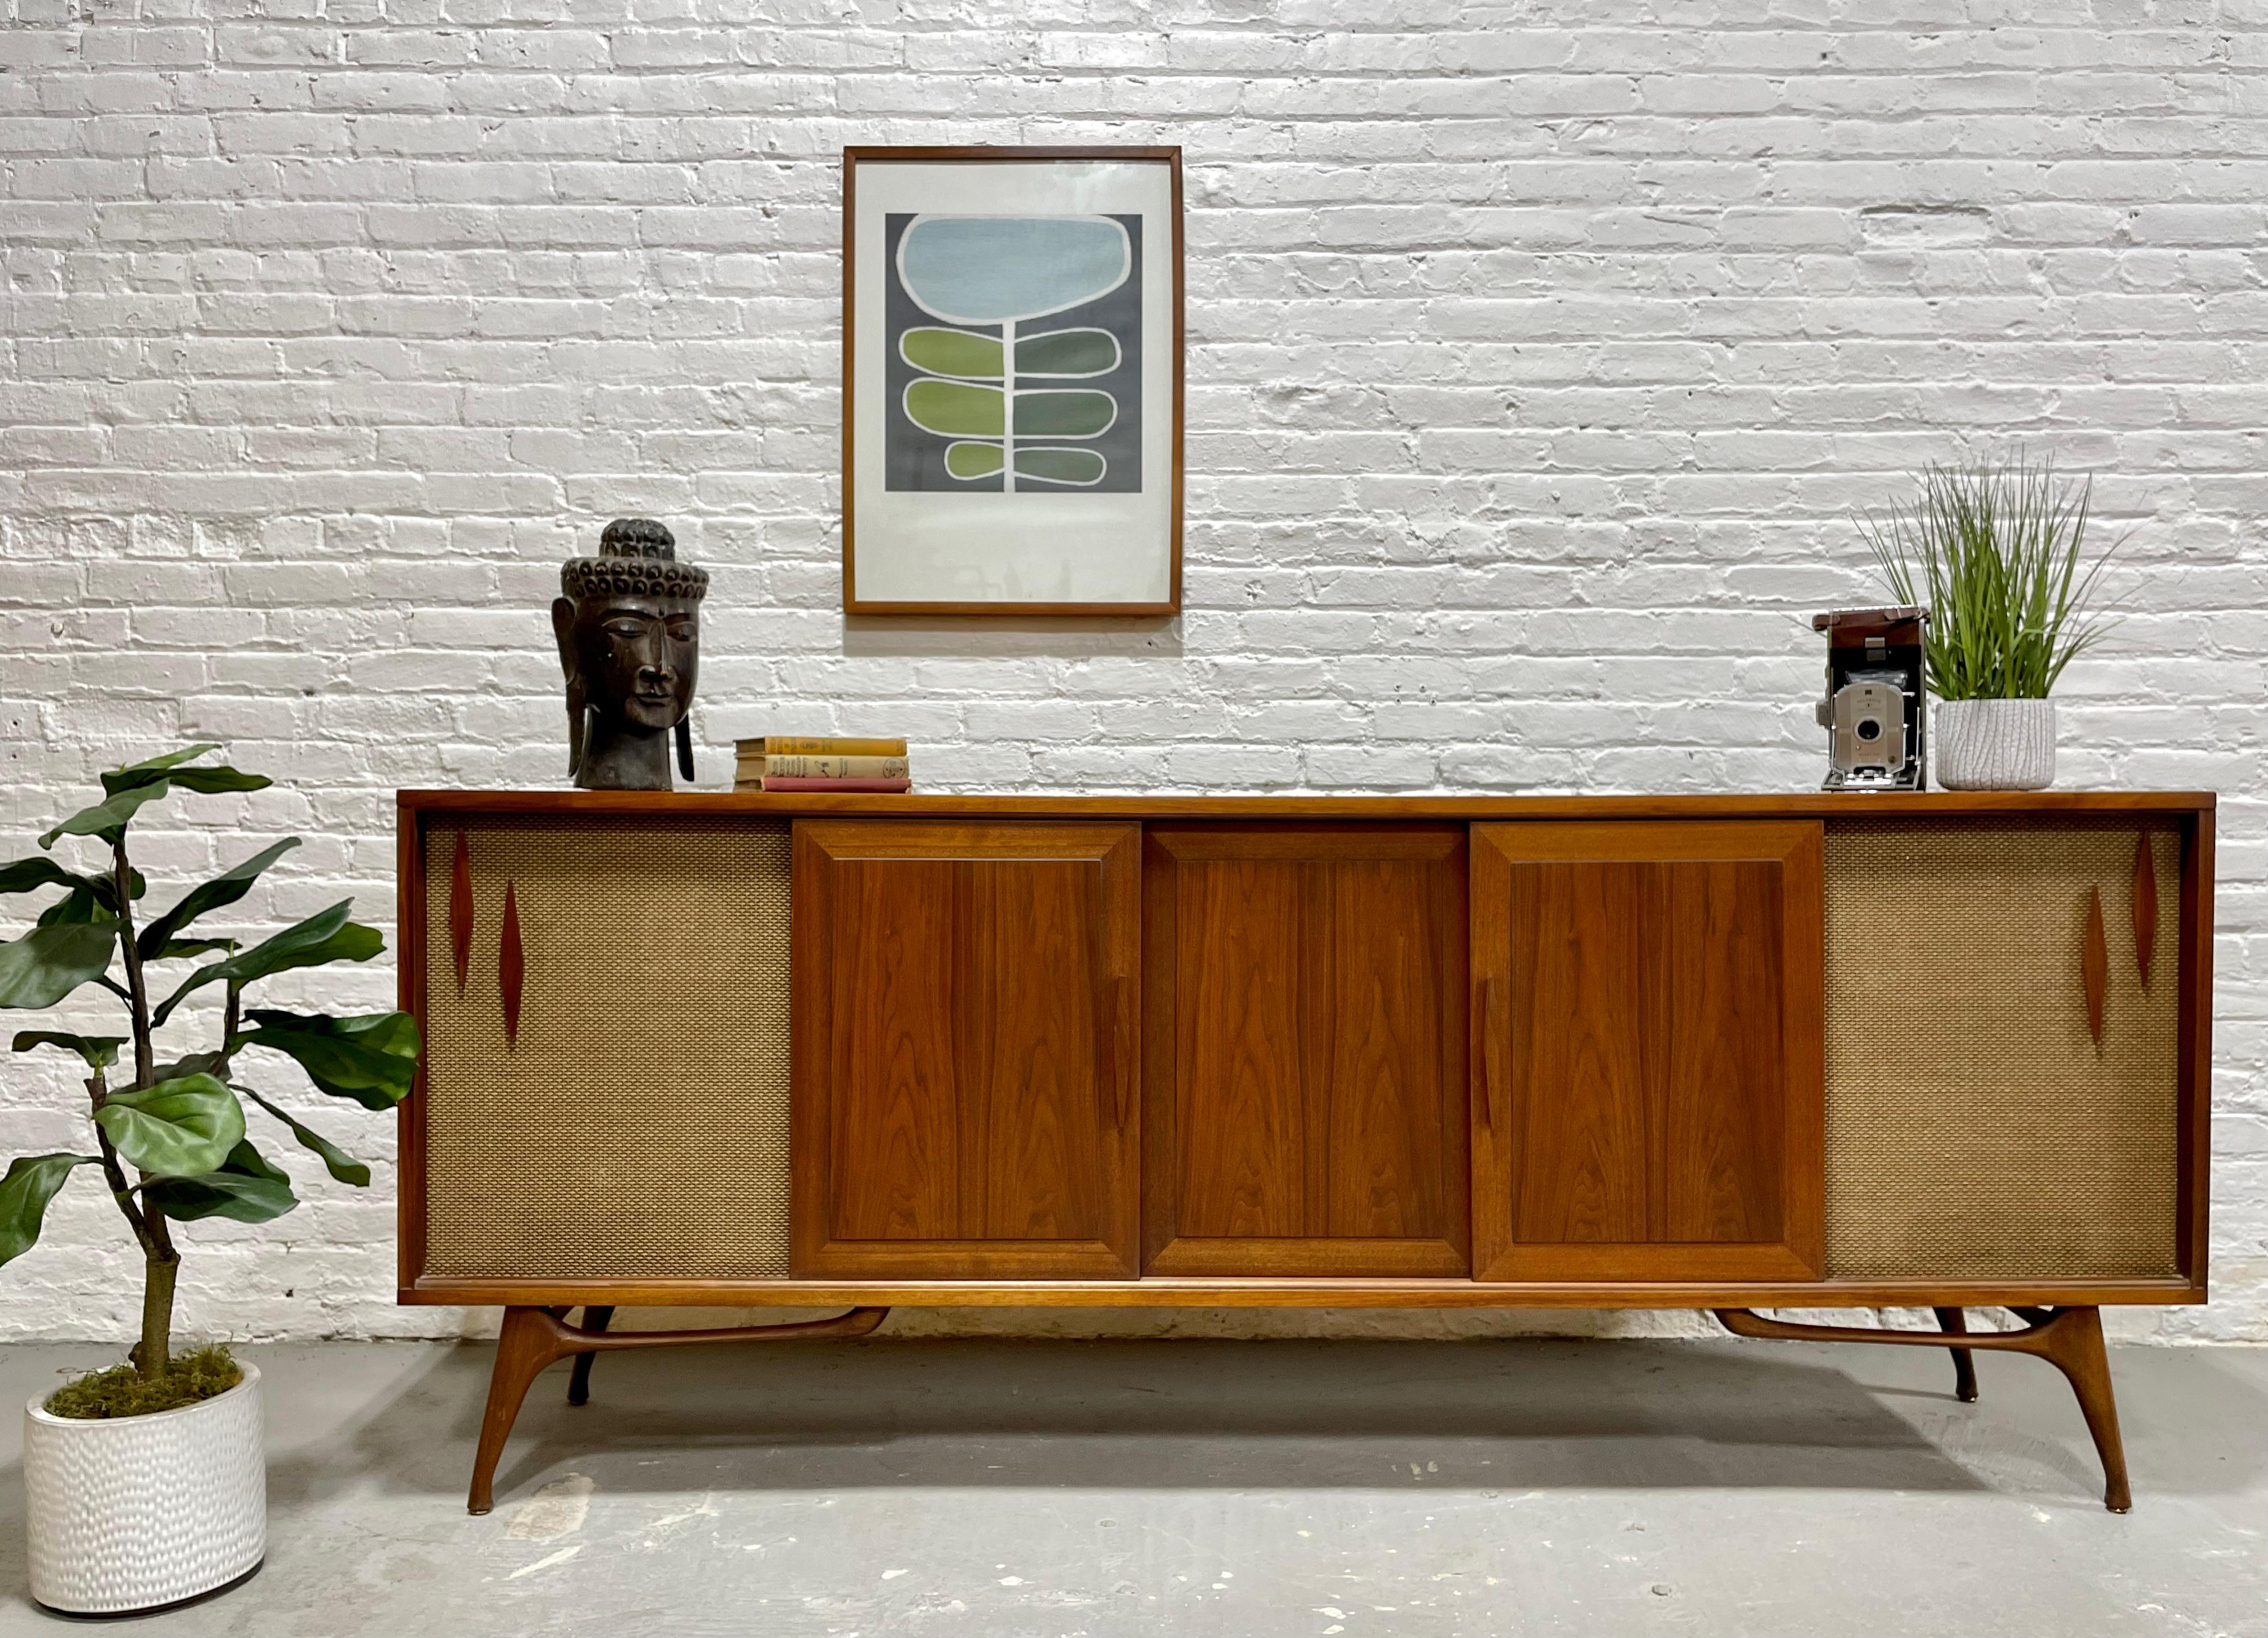 Extra Long and superbly incredible Mid Century Modern Stereo Cabinet / Credenza, c. 1960's. This custom made walnut sideboard is truly one of a kind and will fill your wall like no other. The credenza is flanked by two speaker storage cabinets on